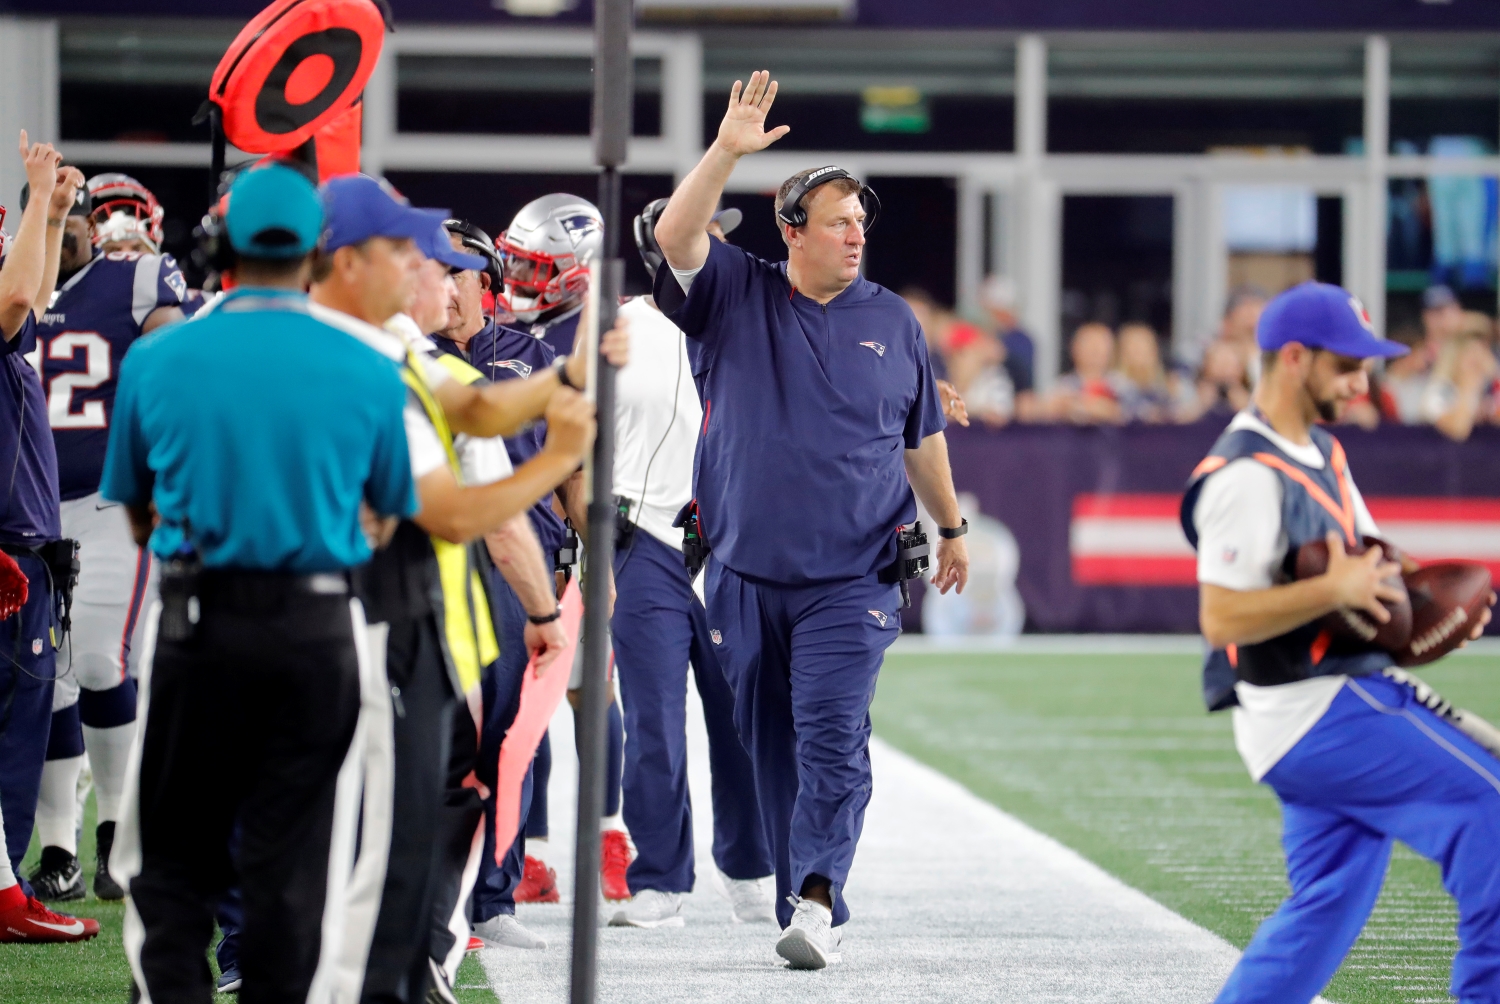 New England Patriots defensive line coach Bret Bielema walks on the sideline during a preseason game.